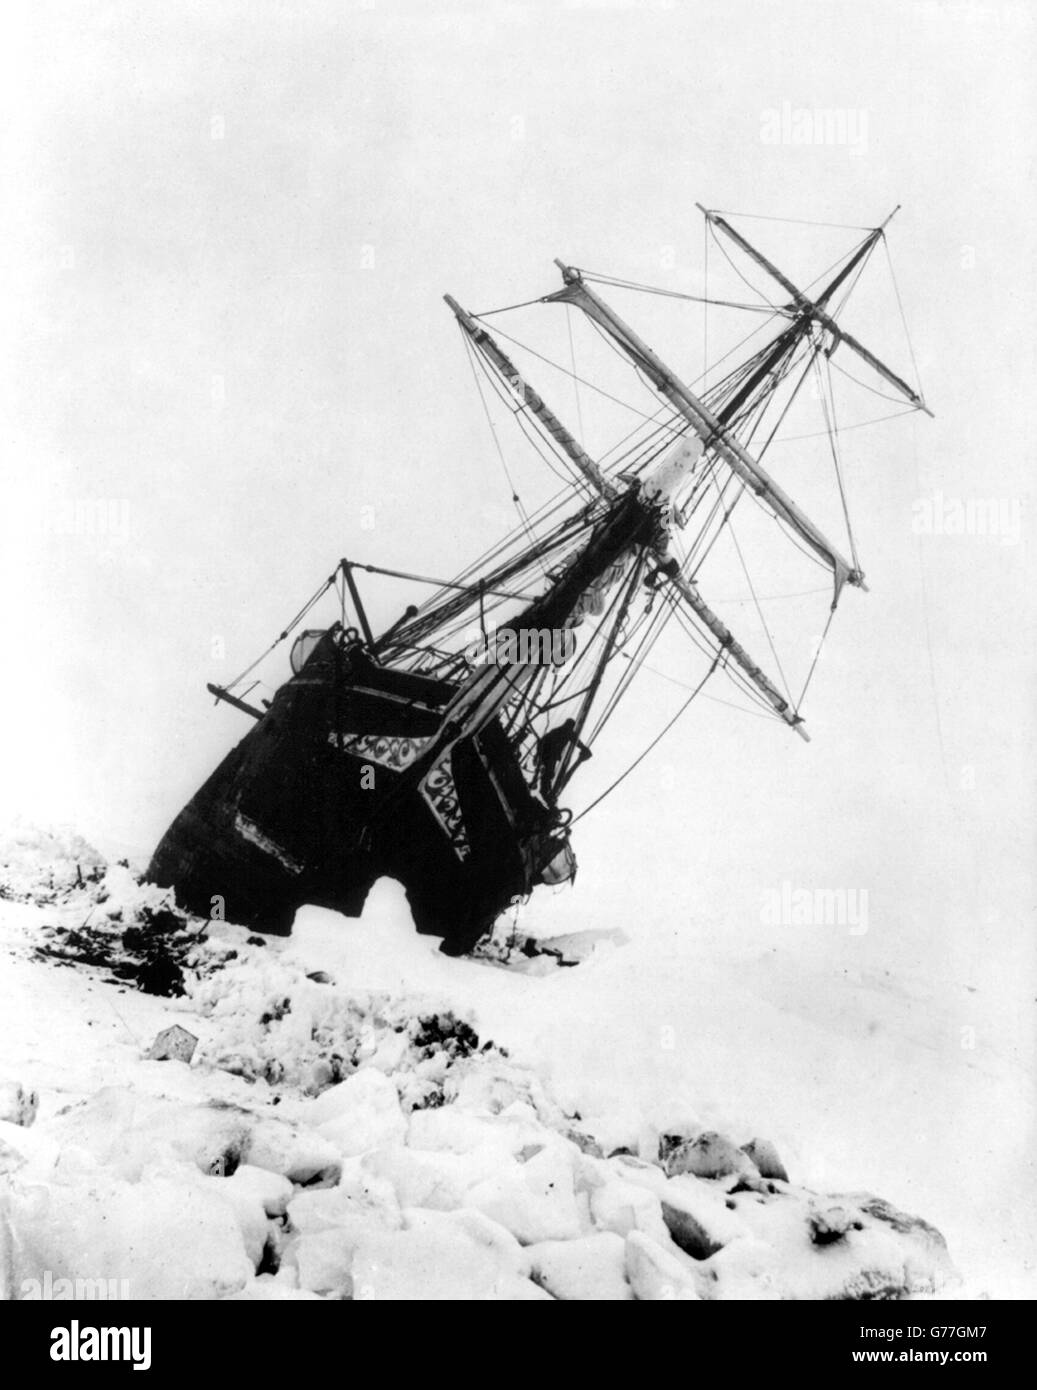 Ernest Shackleton, Endurance. Sir Ernest Shackleton's ship, Endurance, trapped in the ice during the 1914/15 Imperial Trans-Antarctic Expedition. Stock Photo